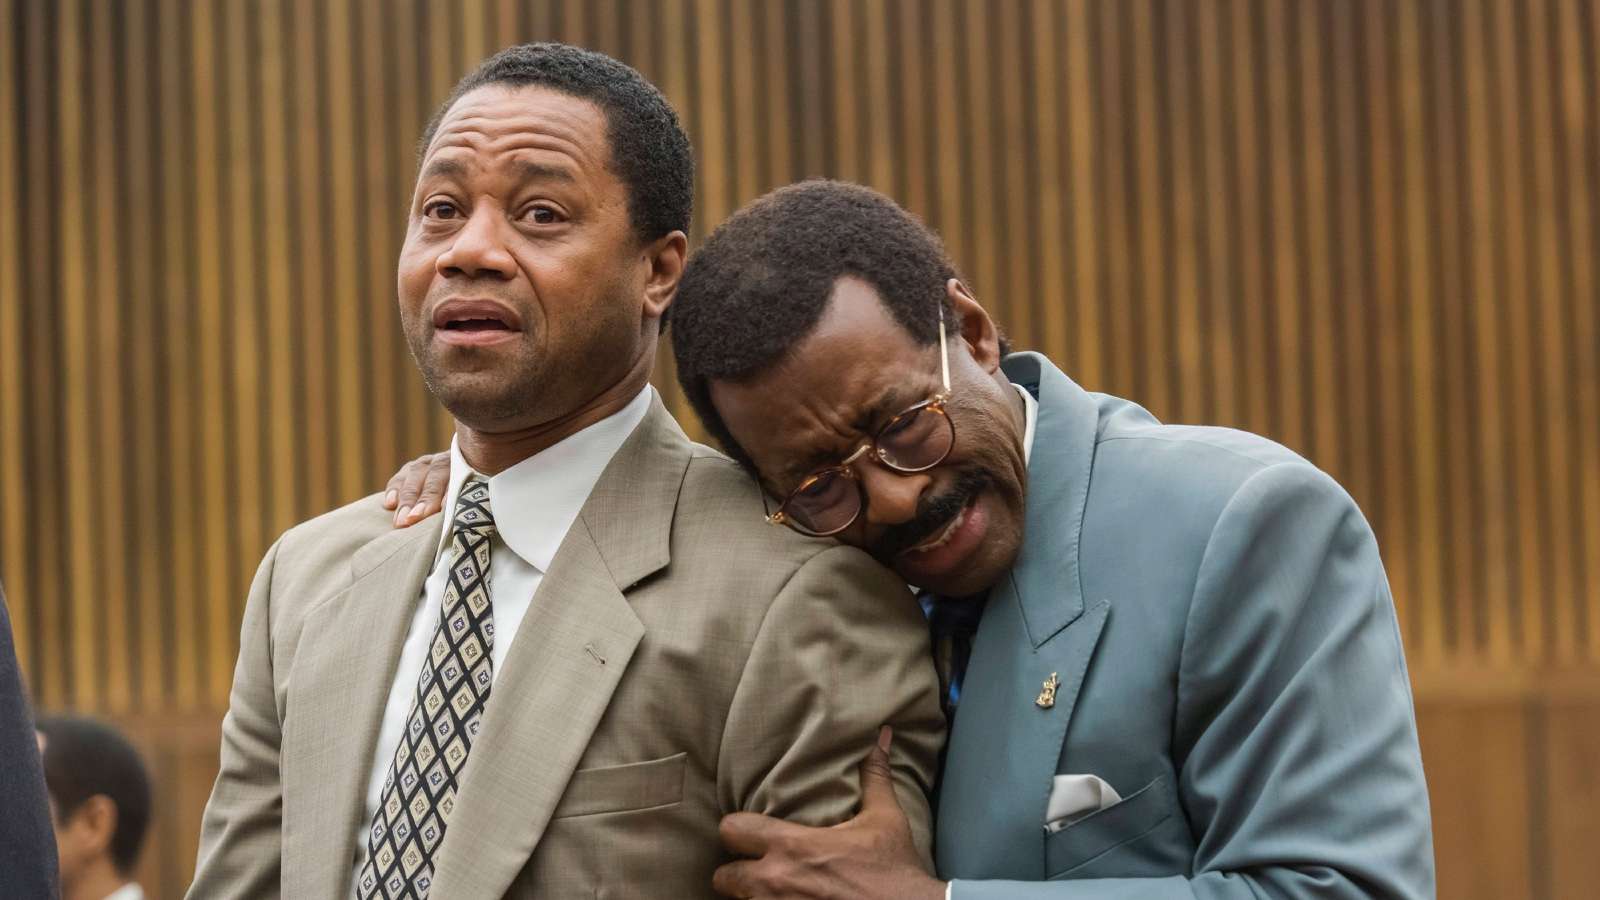 Cuba Gooding Jr. and Courtney B. Vance in The People v. O. J. Simpson Episode 10.